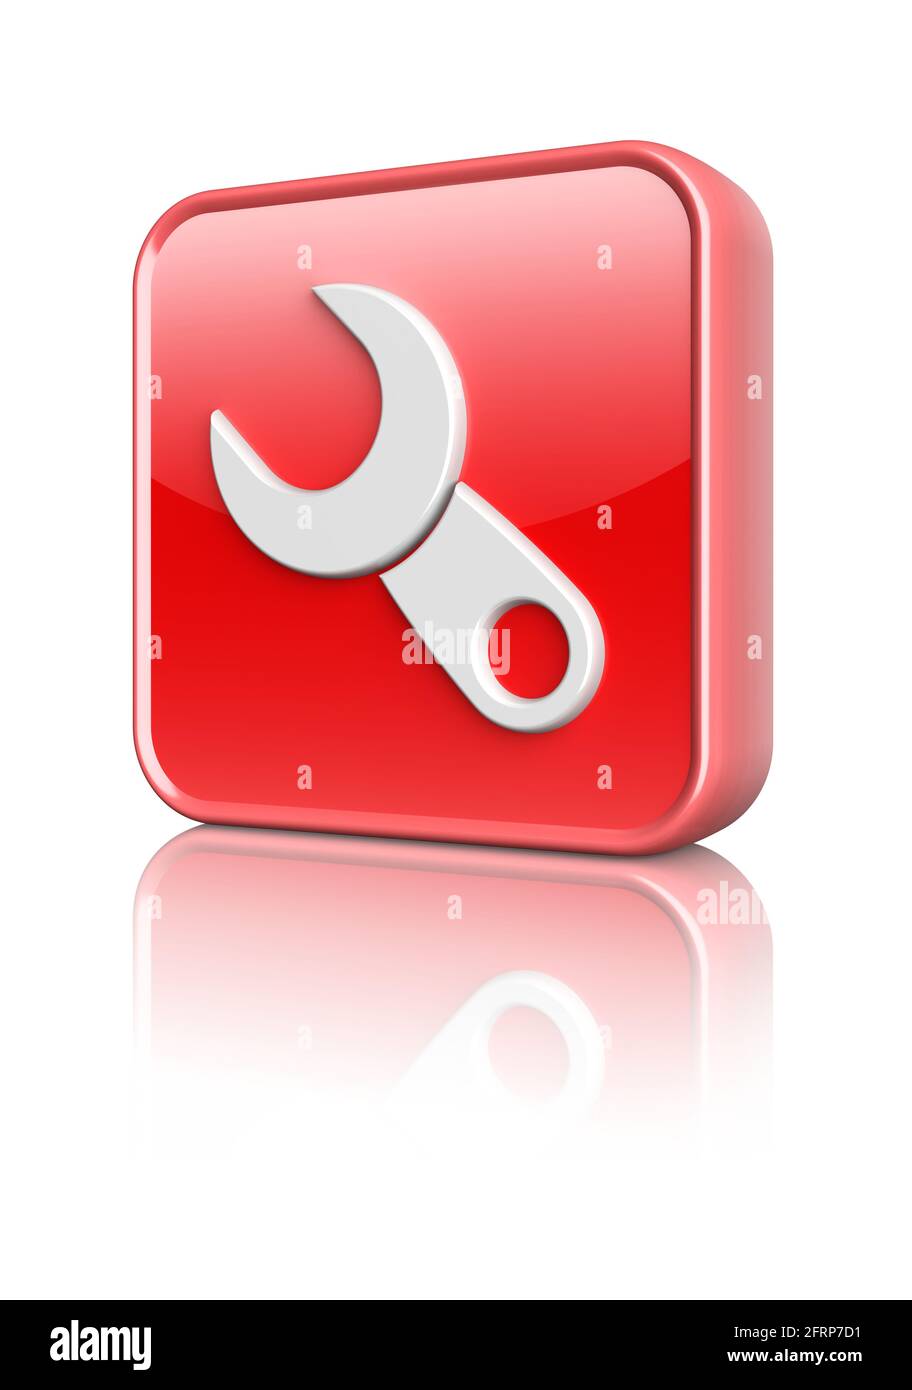 Red settings icon button. 3d image Stock Photo